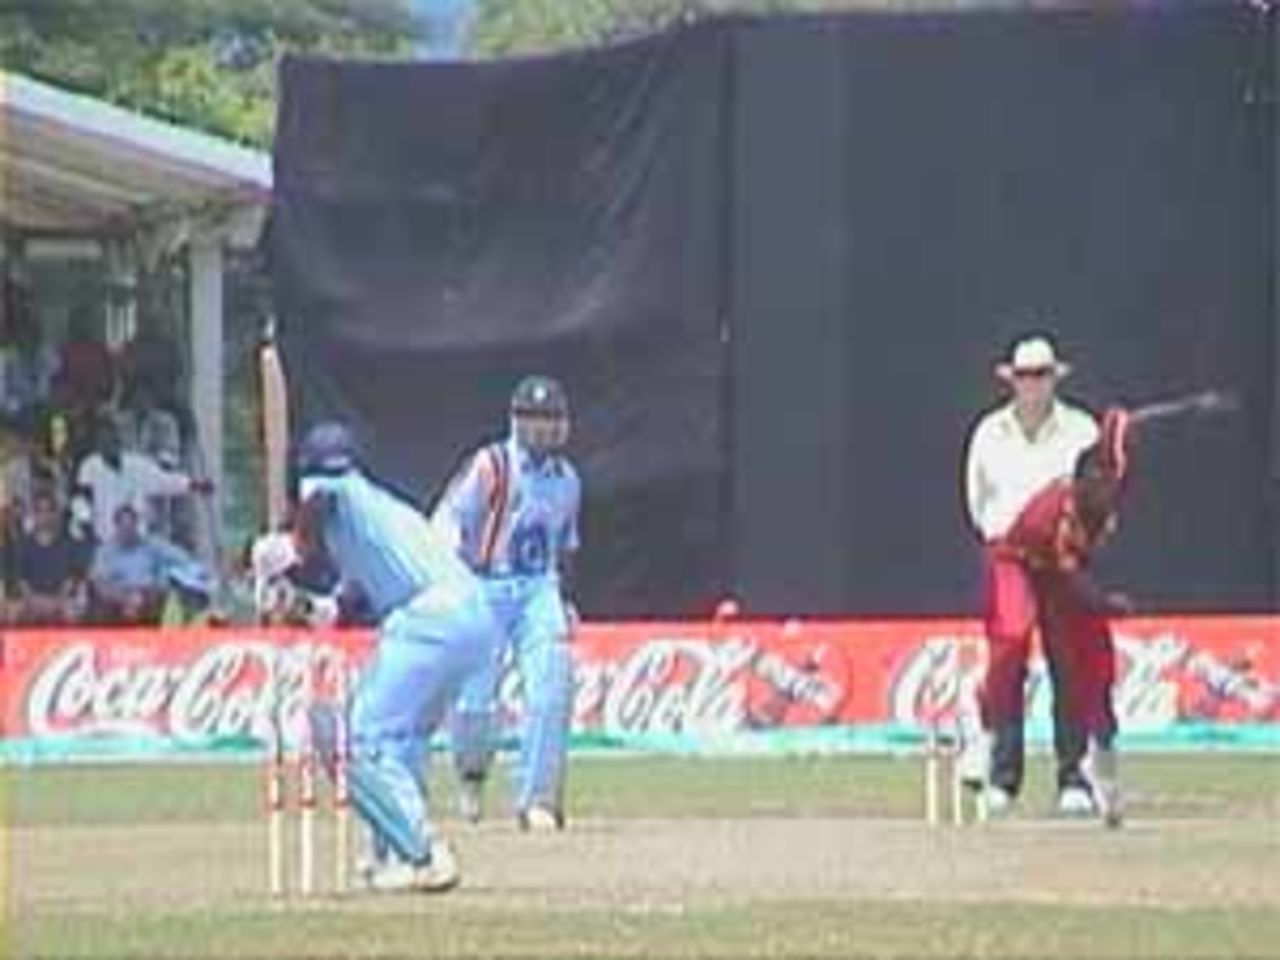 Vinod Kambli waiting for the ball, just before he was dismissed, India v West Indies (Final), Coca-Cola Singapore Challenge, 1999-2000, Kallang Ground, Singapore, 7 Sep 1999.